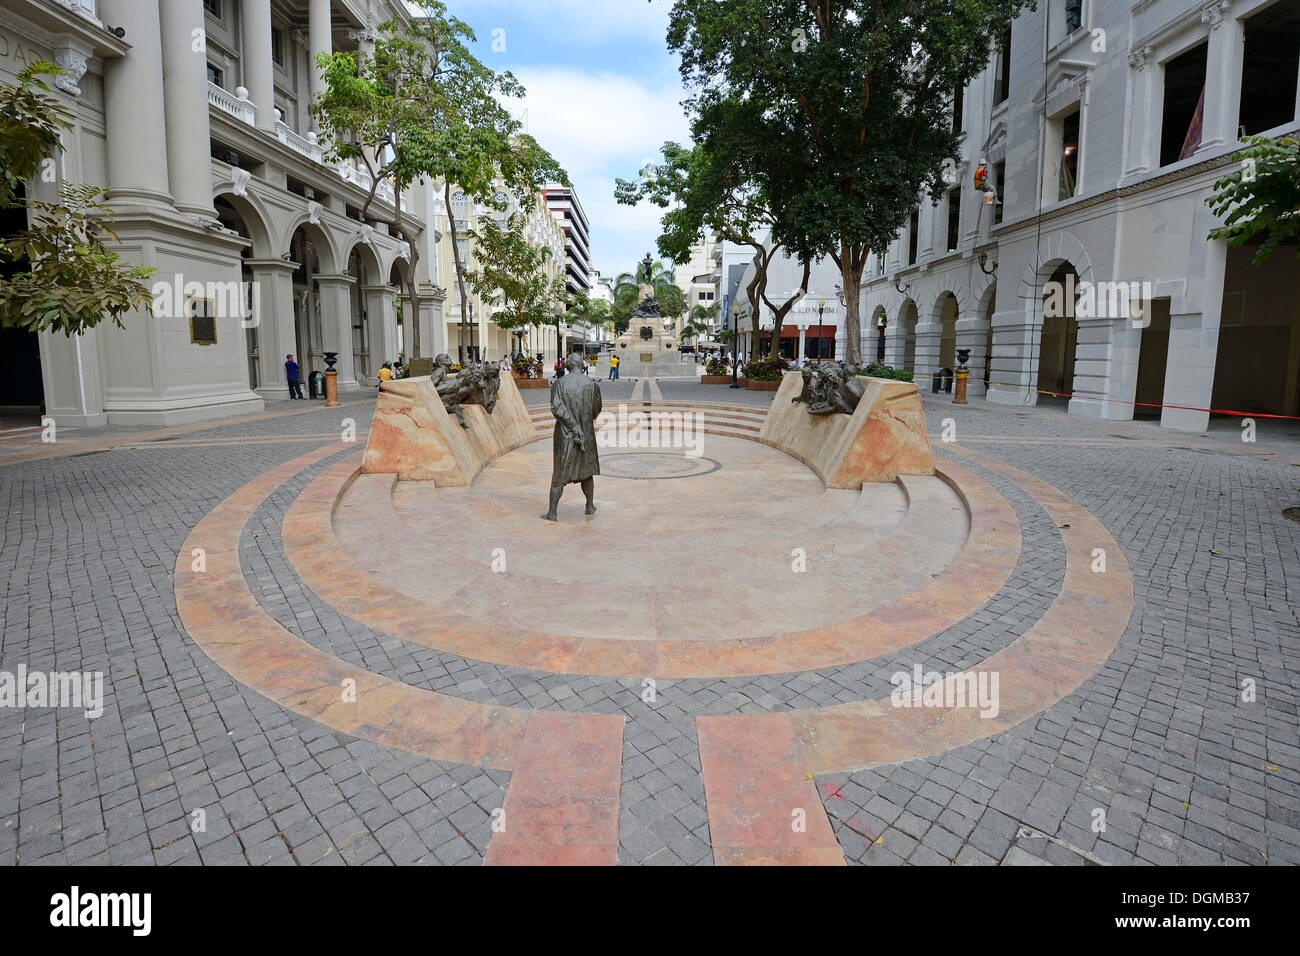 Independence monument in the pedestrianised zone in the old town of Guayaquil, Ecuador, South America Stock Photo